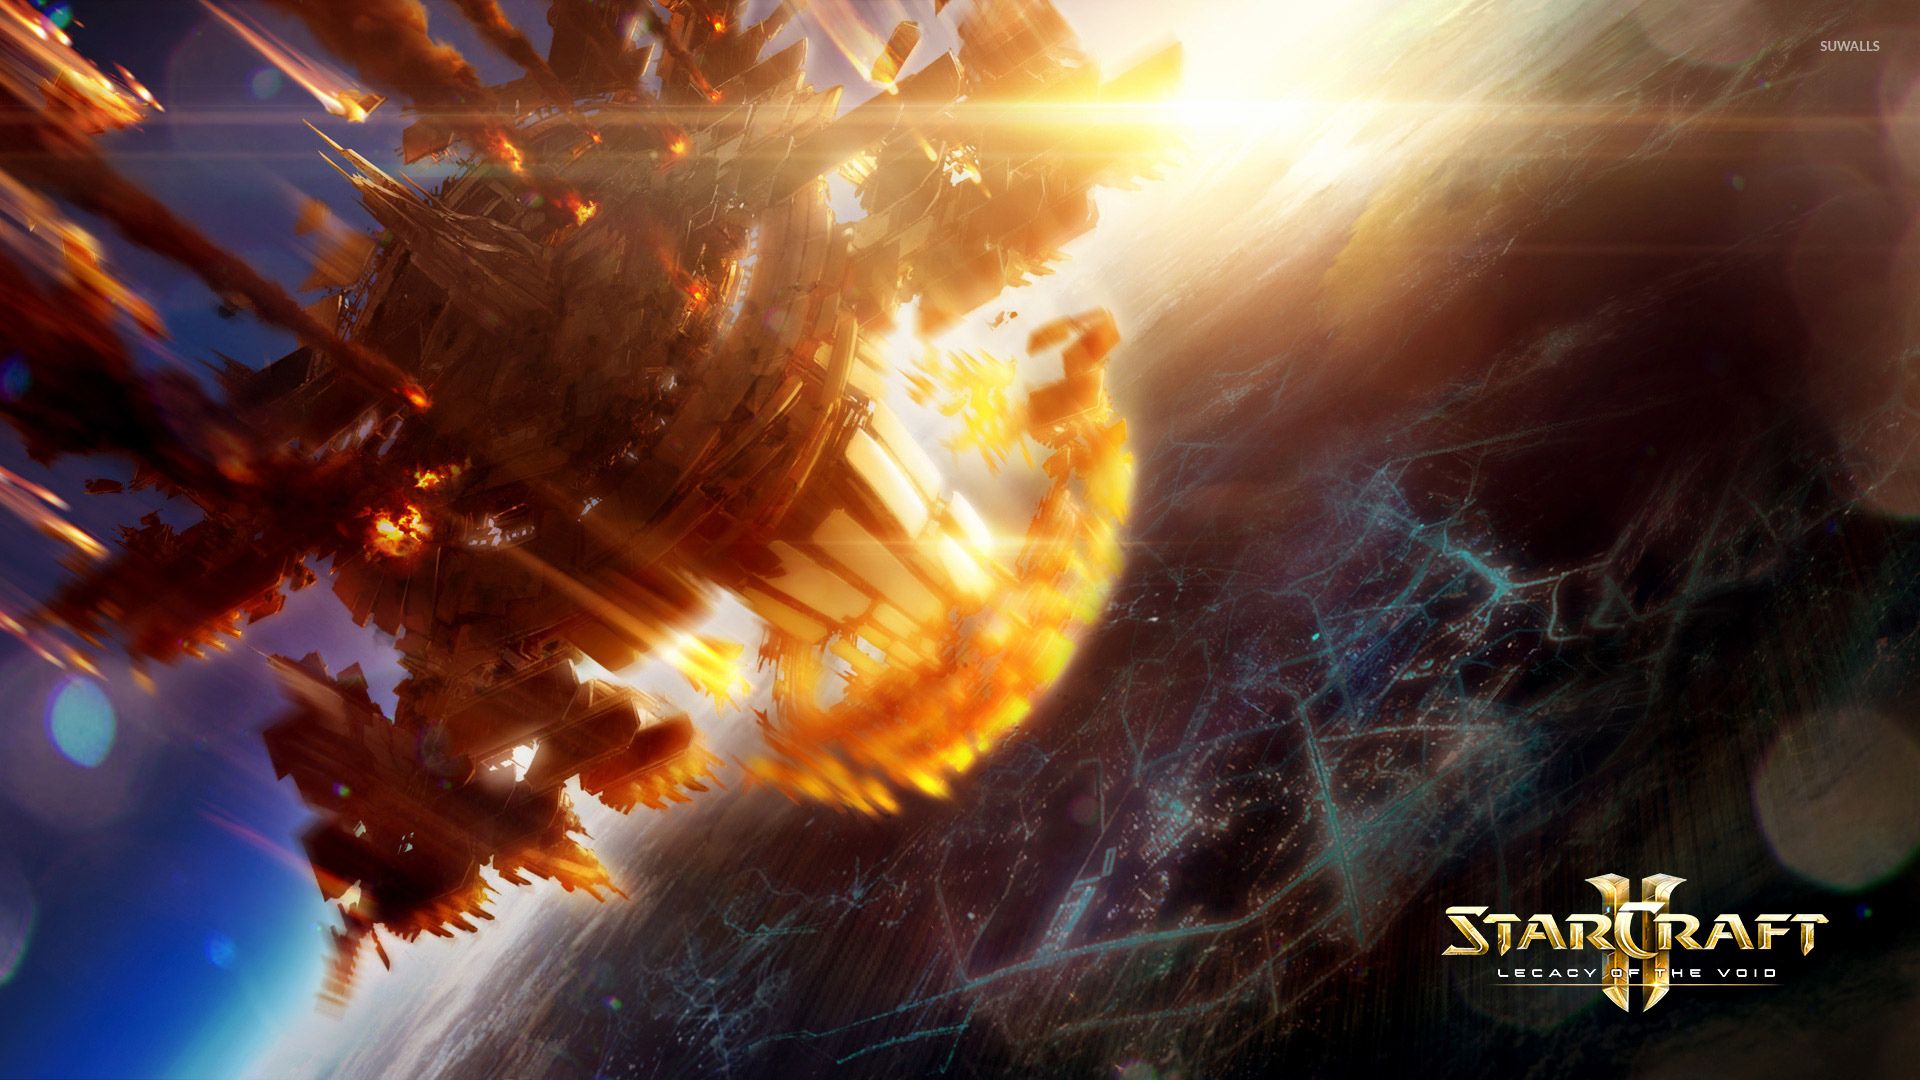 Burning spaceship in StarCraft II: Legacy of the Void wallpaper wallpaper